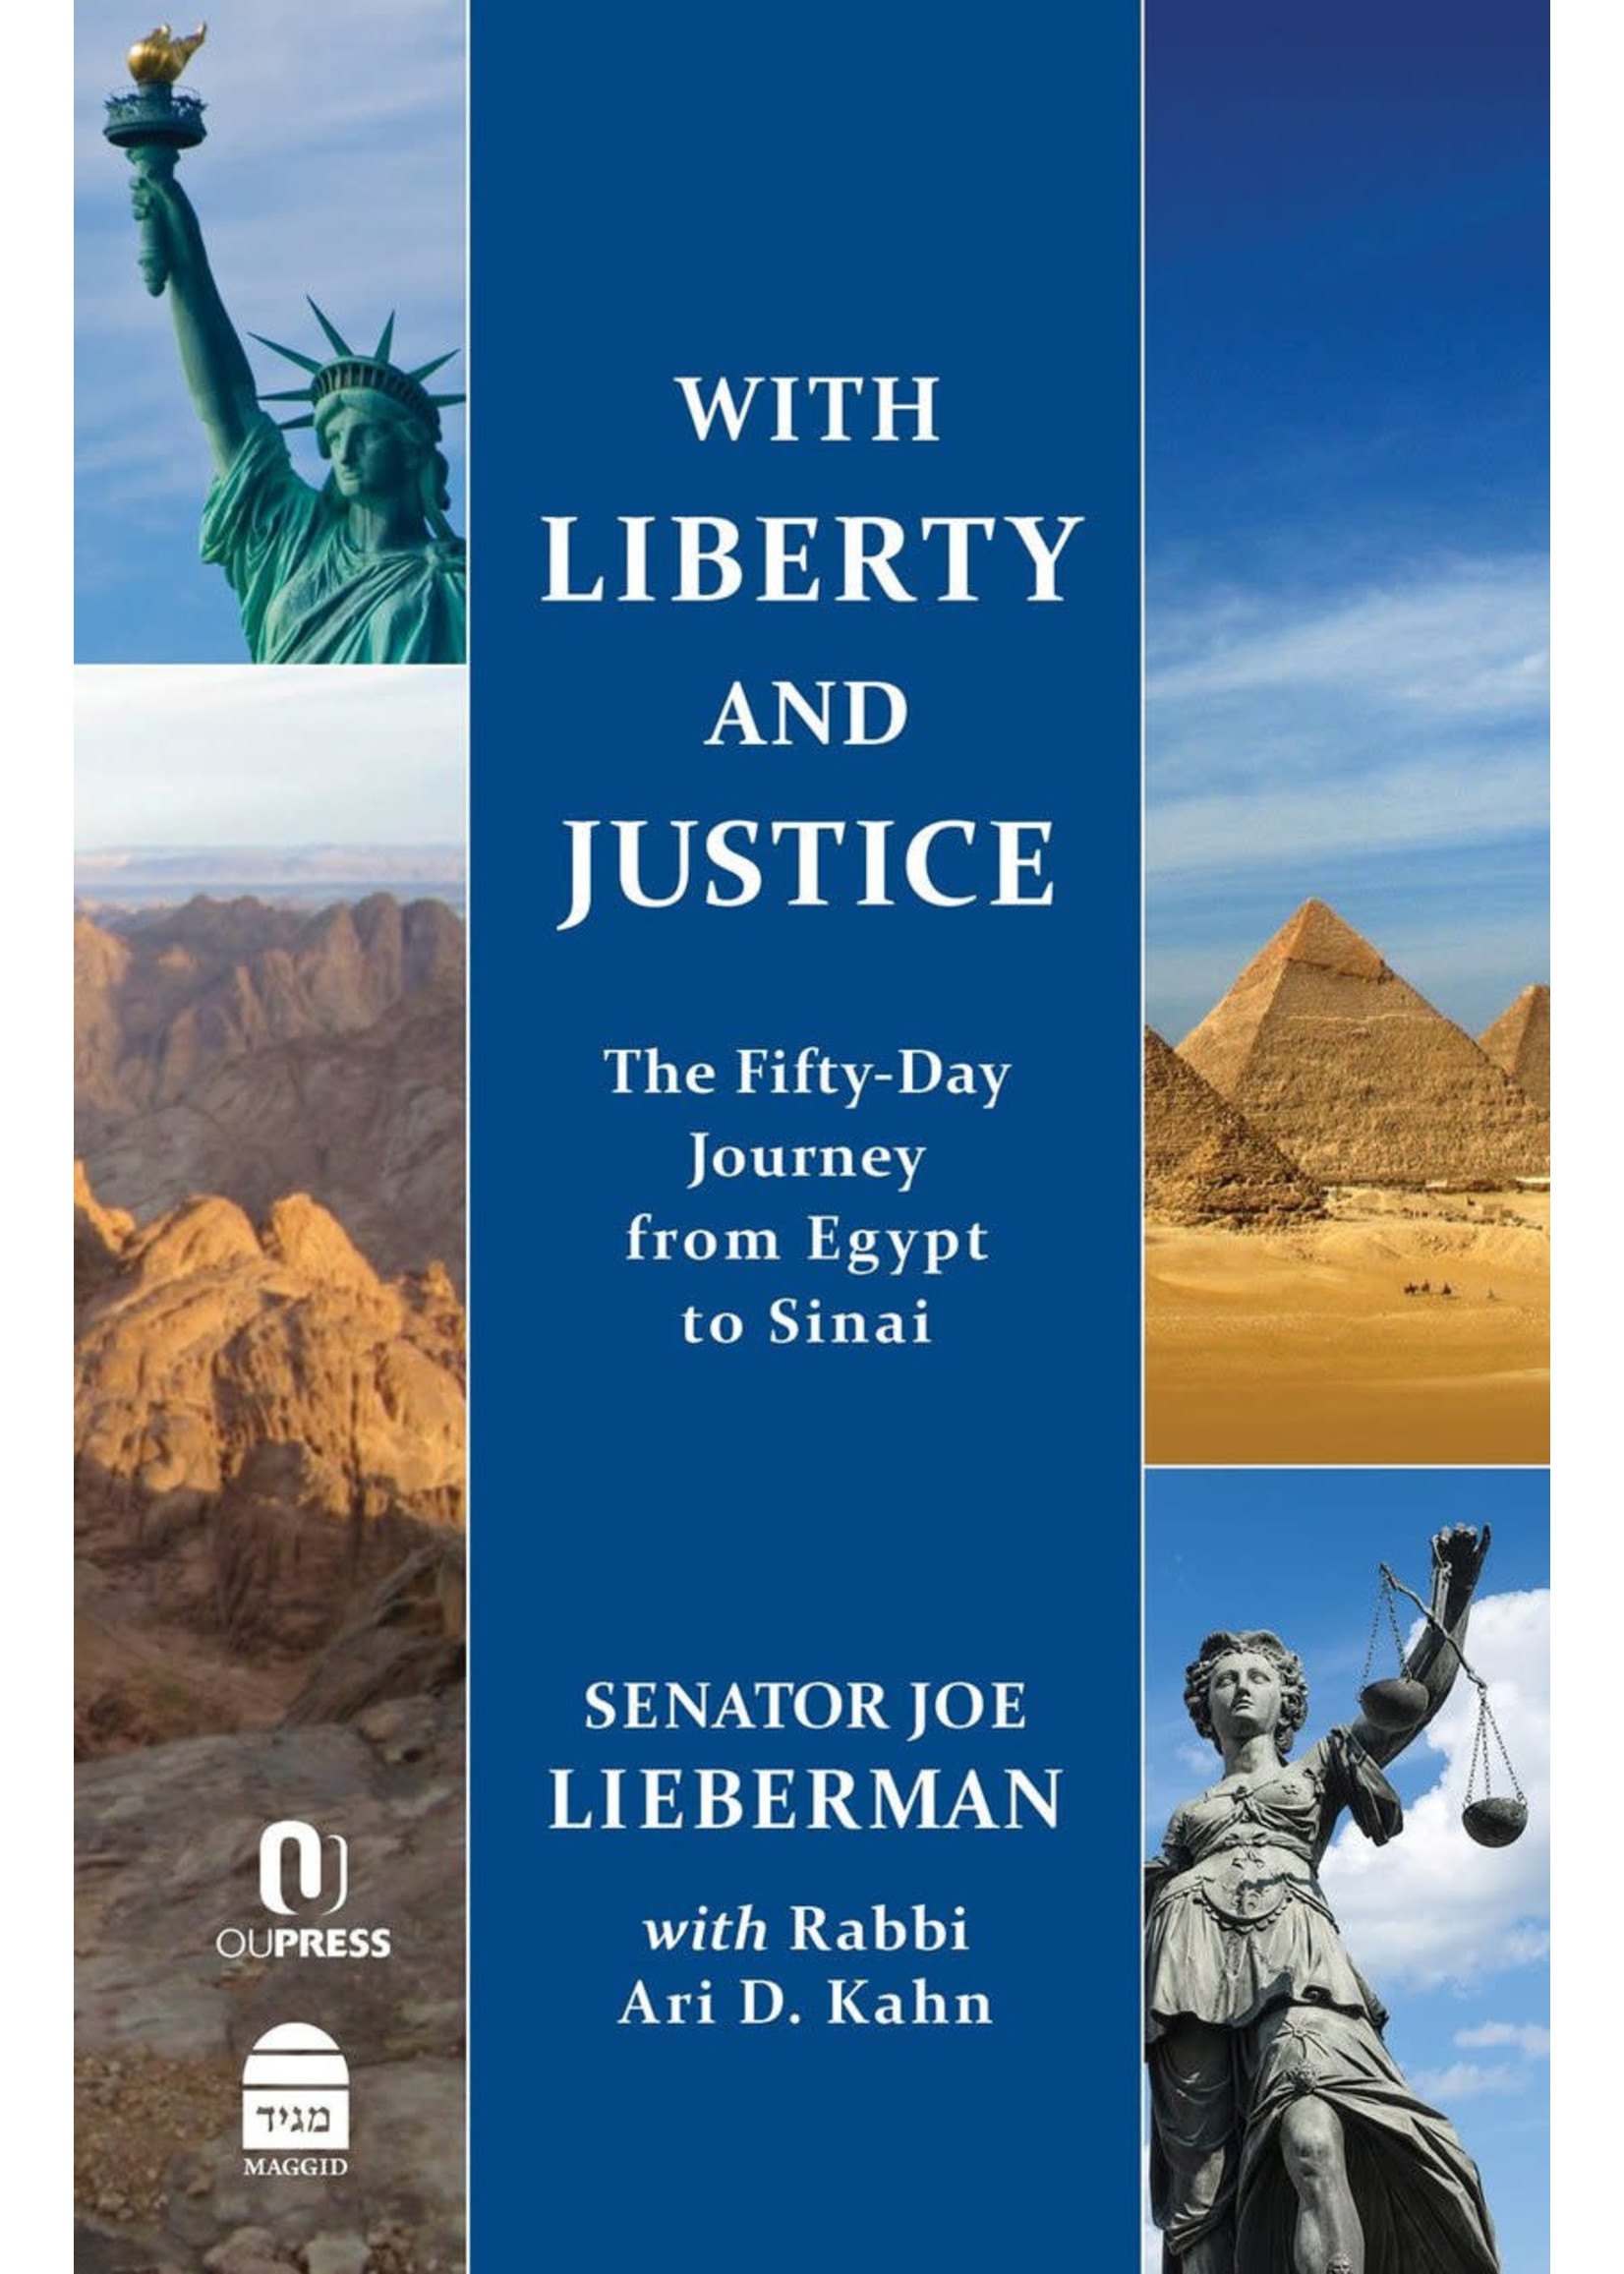 WITH LIBERTY AND JUSTICE